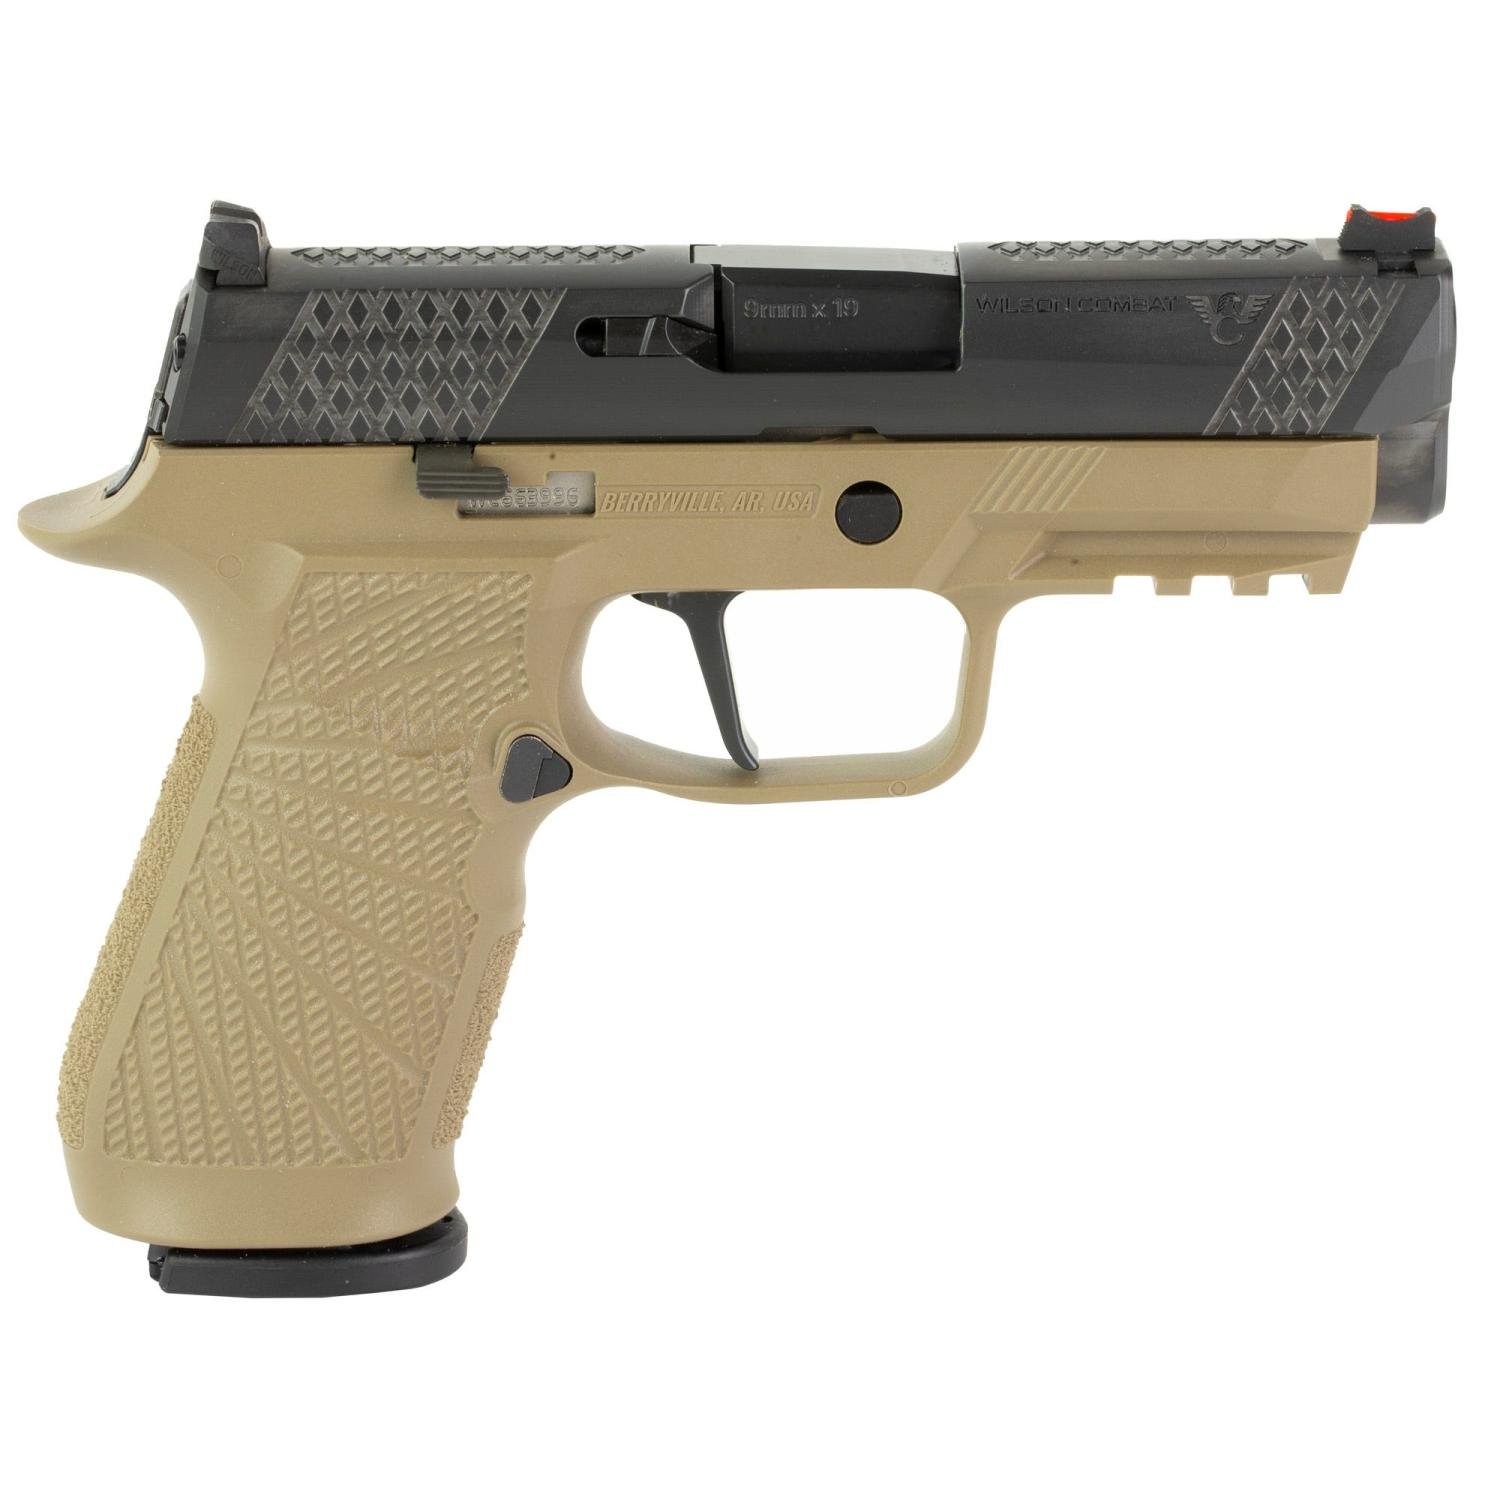 Wilson Combat WCP320 Carry Tan/Black 9mm 3.9" Barrel 17-Rounds - $1510.99 ($7.99 S/H on Firearms)